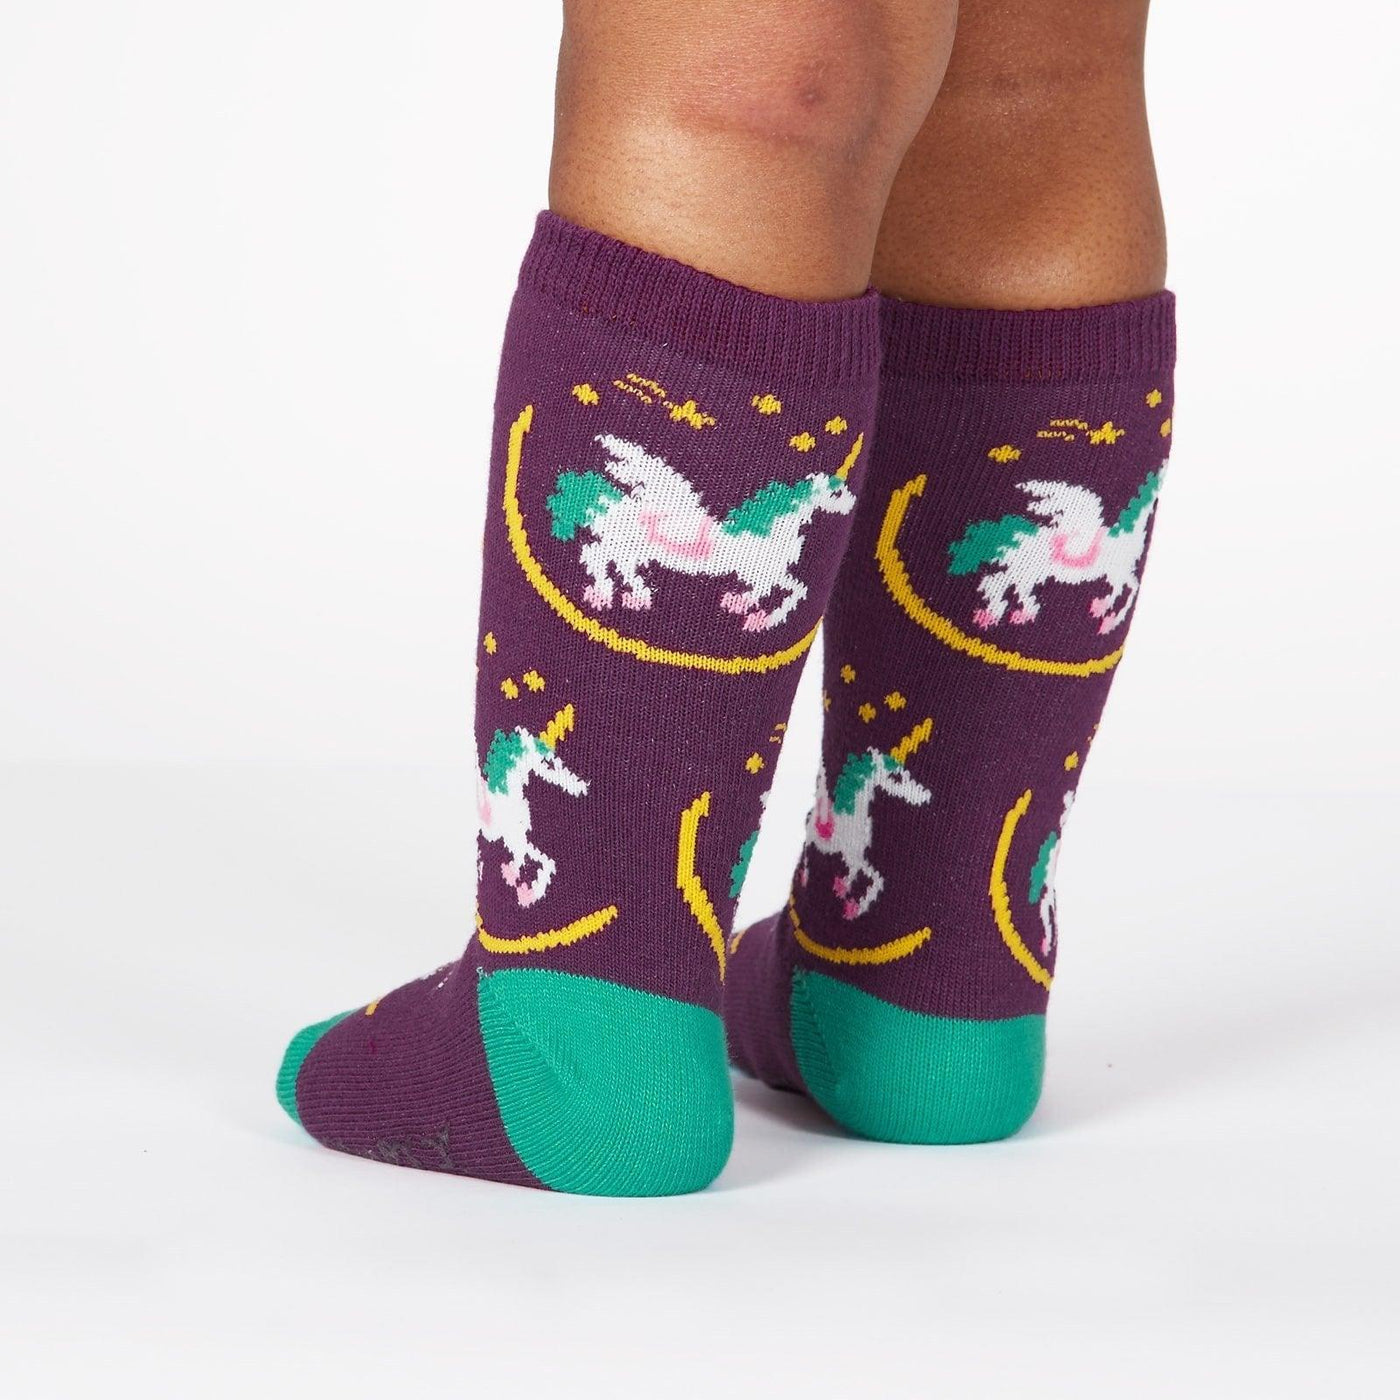 Wish Upon a Pegasus, Toddler Knee-high - Sock It To Me - The Sock Monster